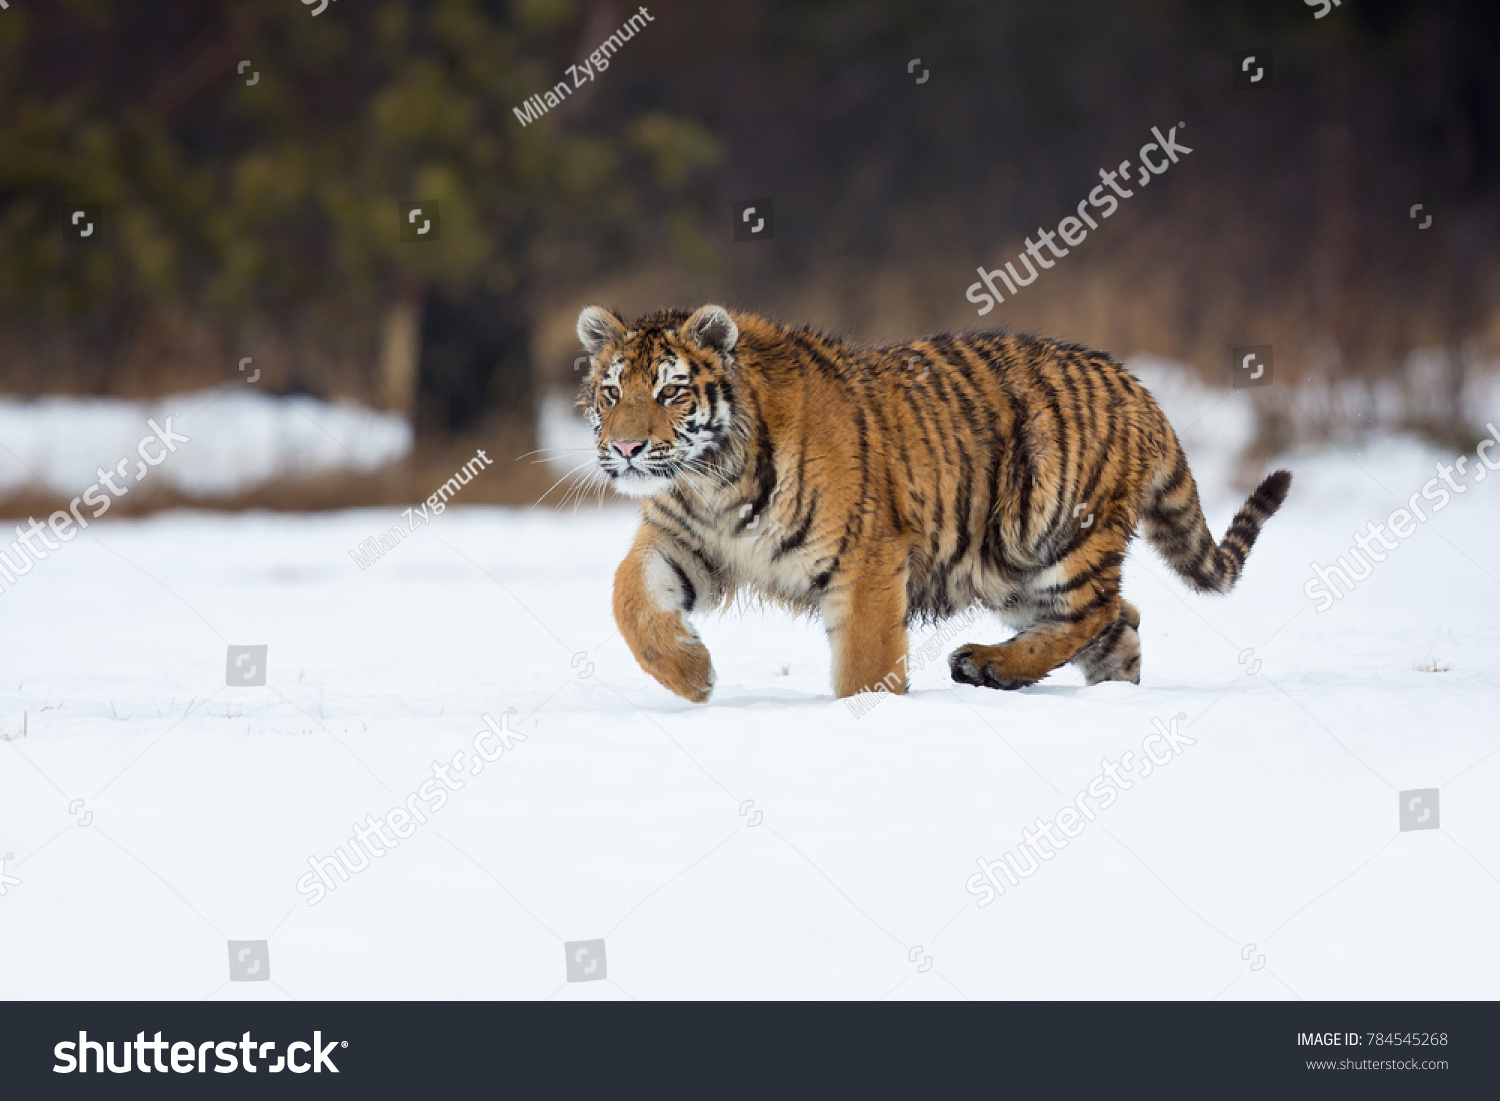 Siberian tiger (Panthera tigris tigris) also called Amur tiger. The tiger is reddish-rusty, or rusty-yellow in color, with narrow black transverse stripes. #784545268